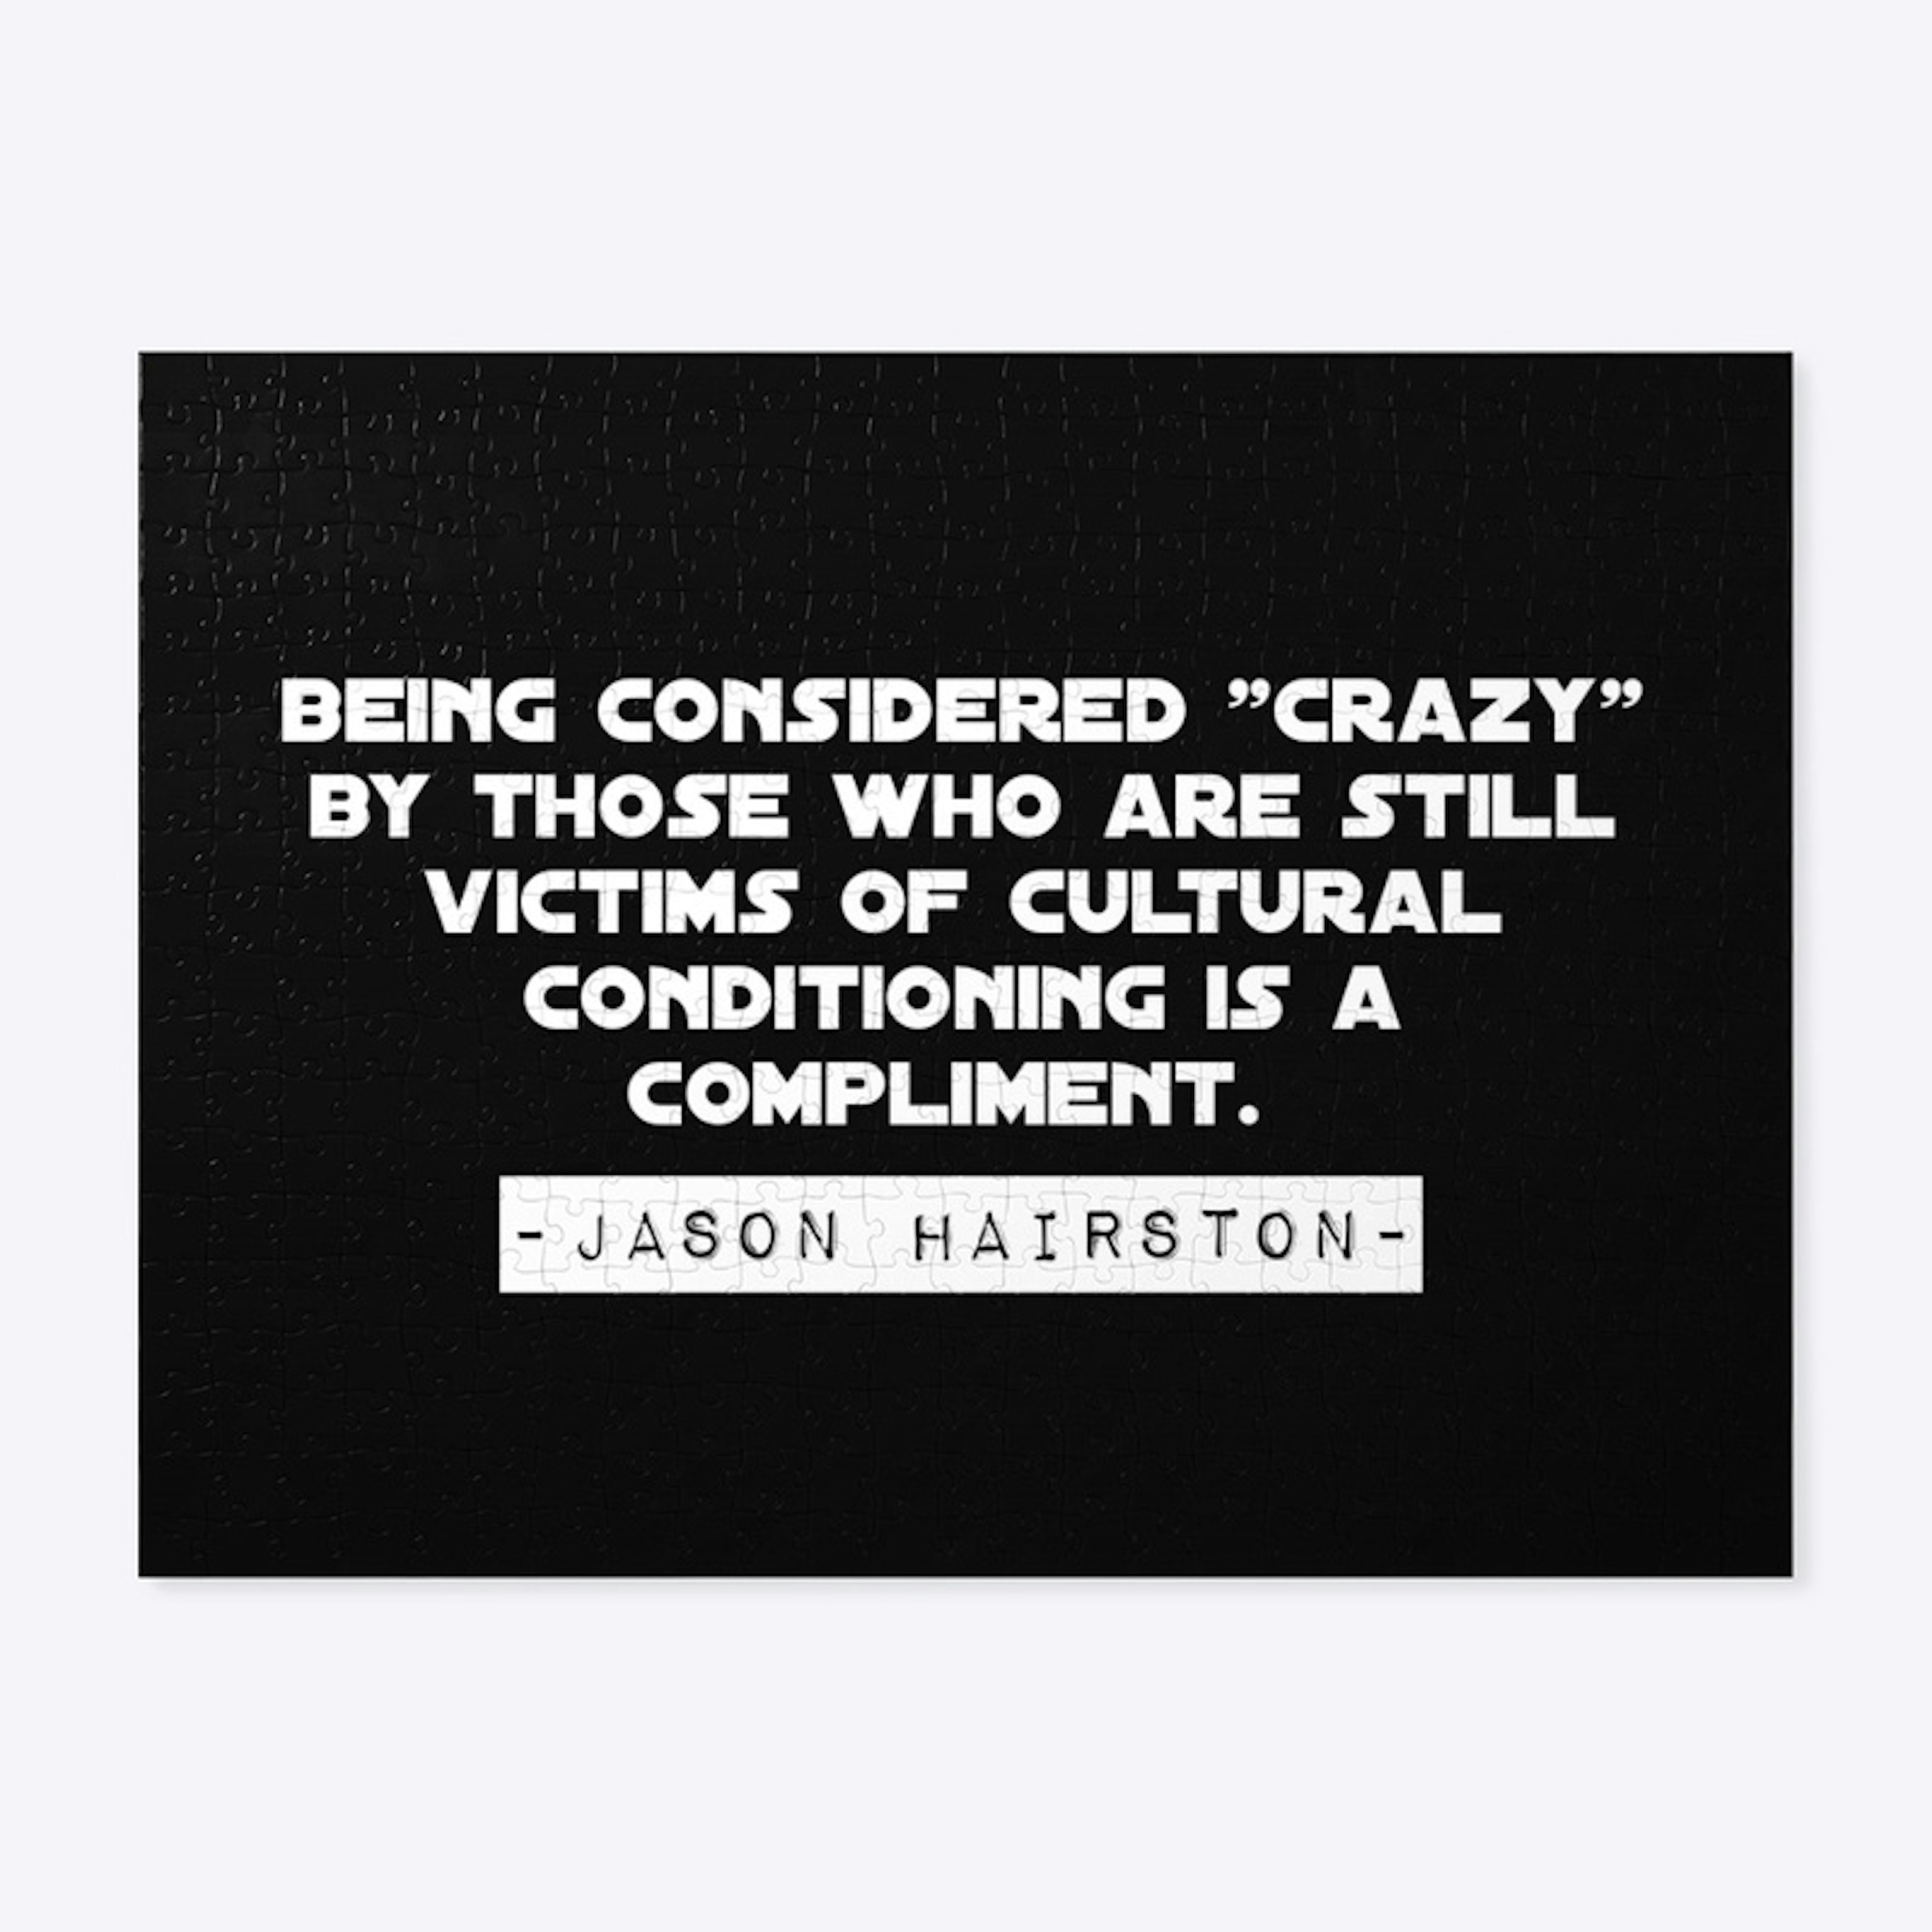 Being Considered "Crazy" Is A Compliment